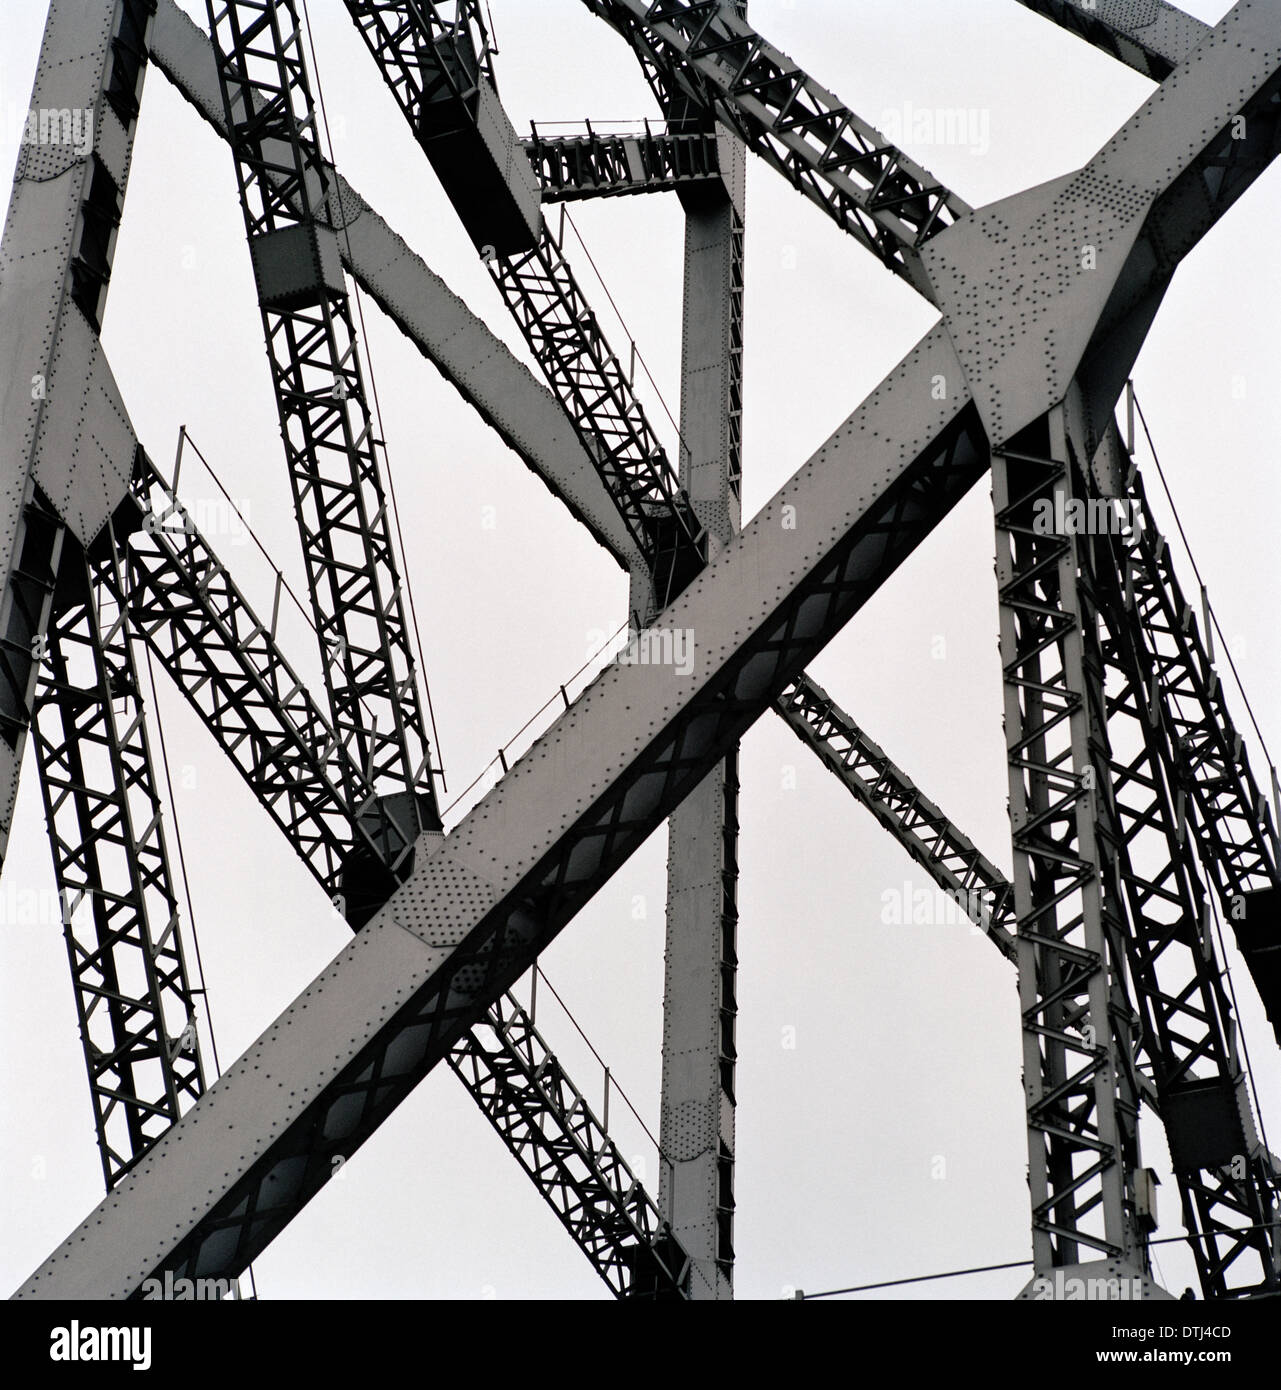 Howrah Bridge in Kolkata Calcutta in West Bengal in India in South Asia. Architecture Building Bridges Design Strength Structures Abstract Art Travel Stock Photo